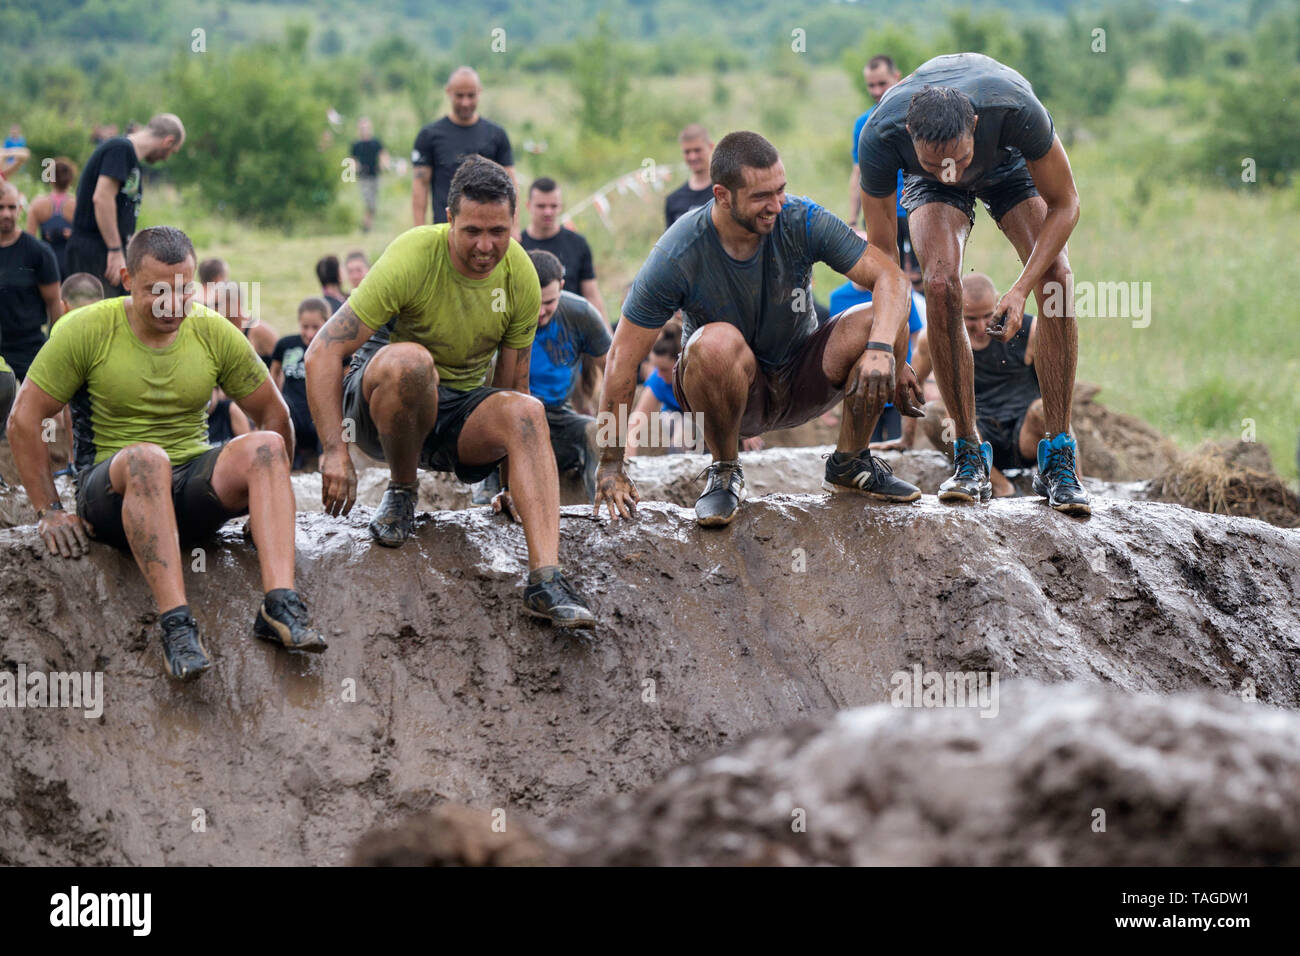 SOFIA, BULGARIA - JULY 7 2018: a team of men jumping in a mud poll to overcome the obstacle course in a strength mud race Stock Photo